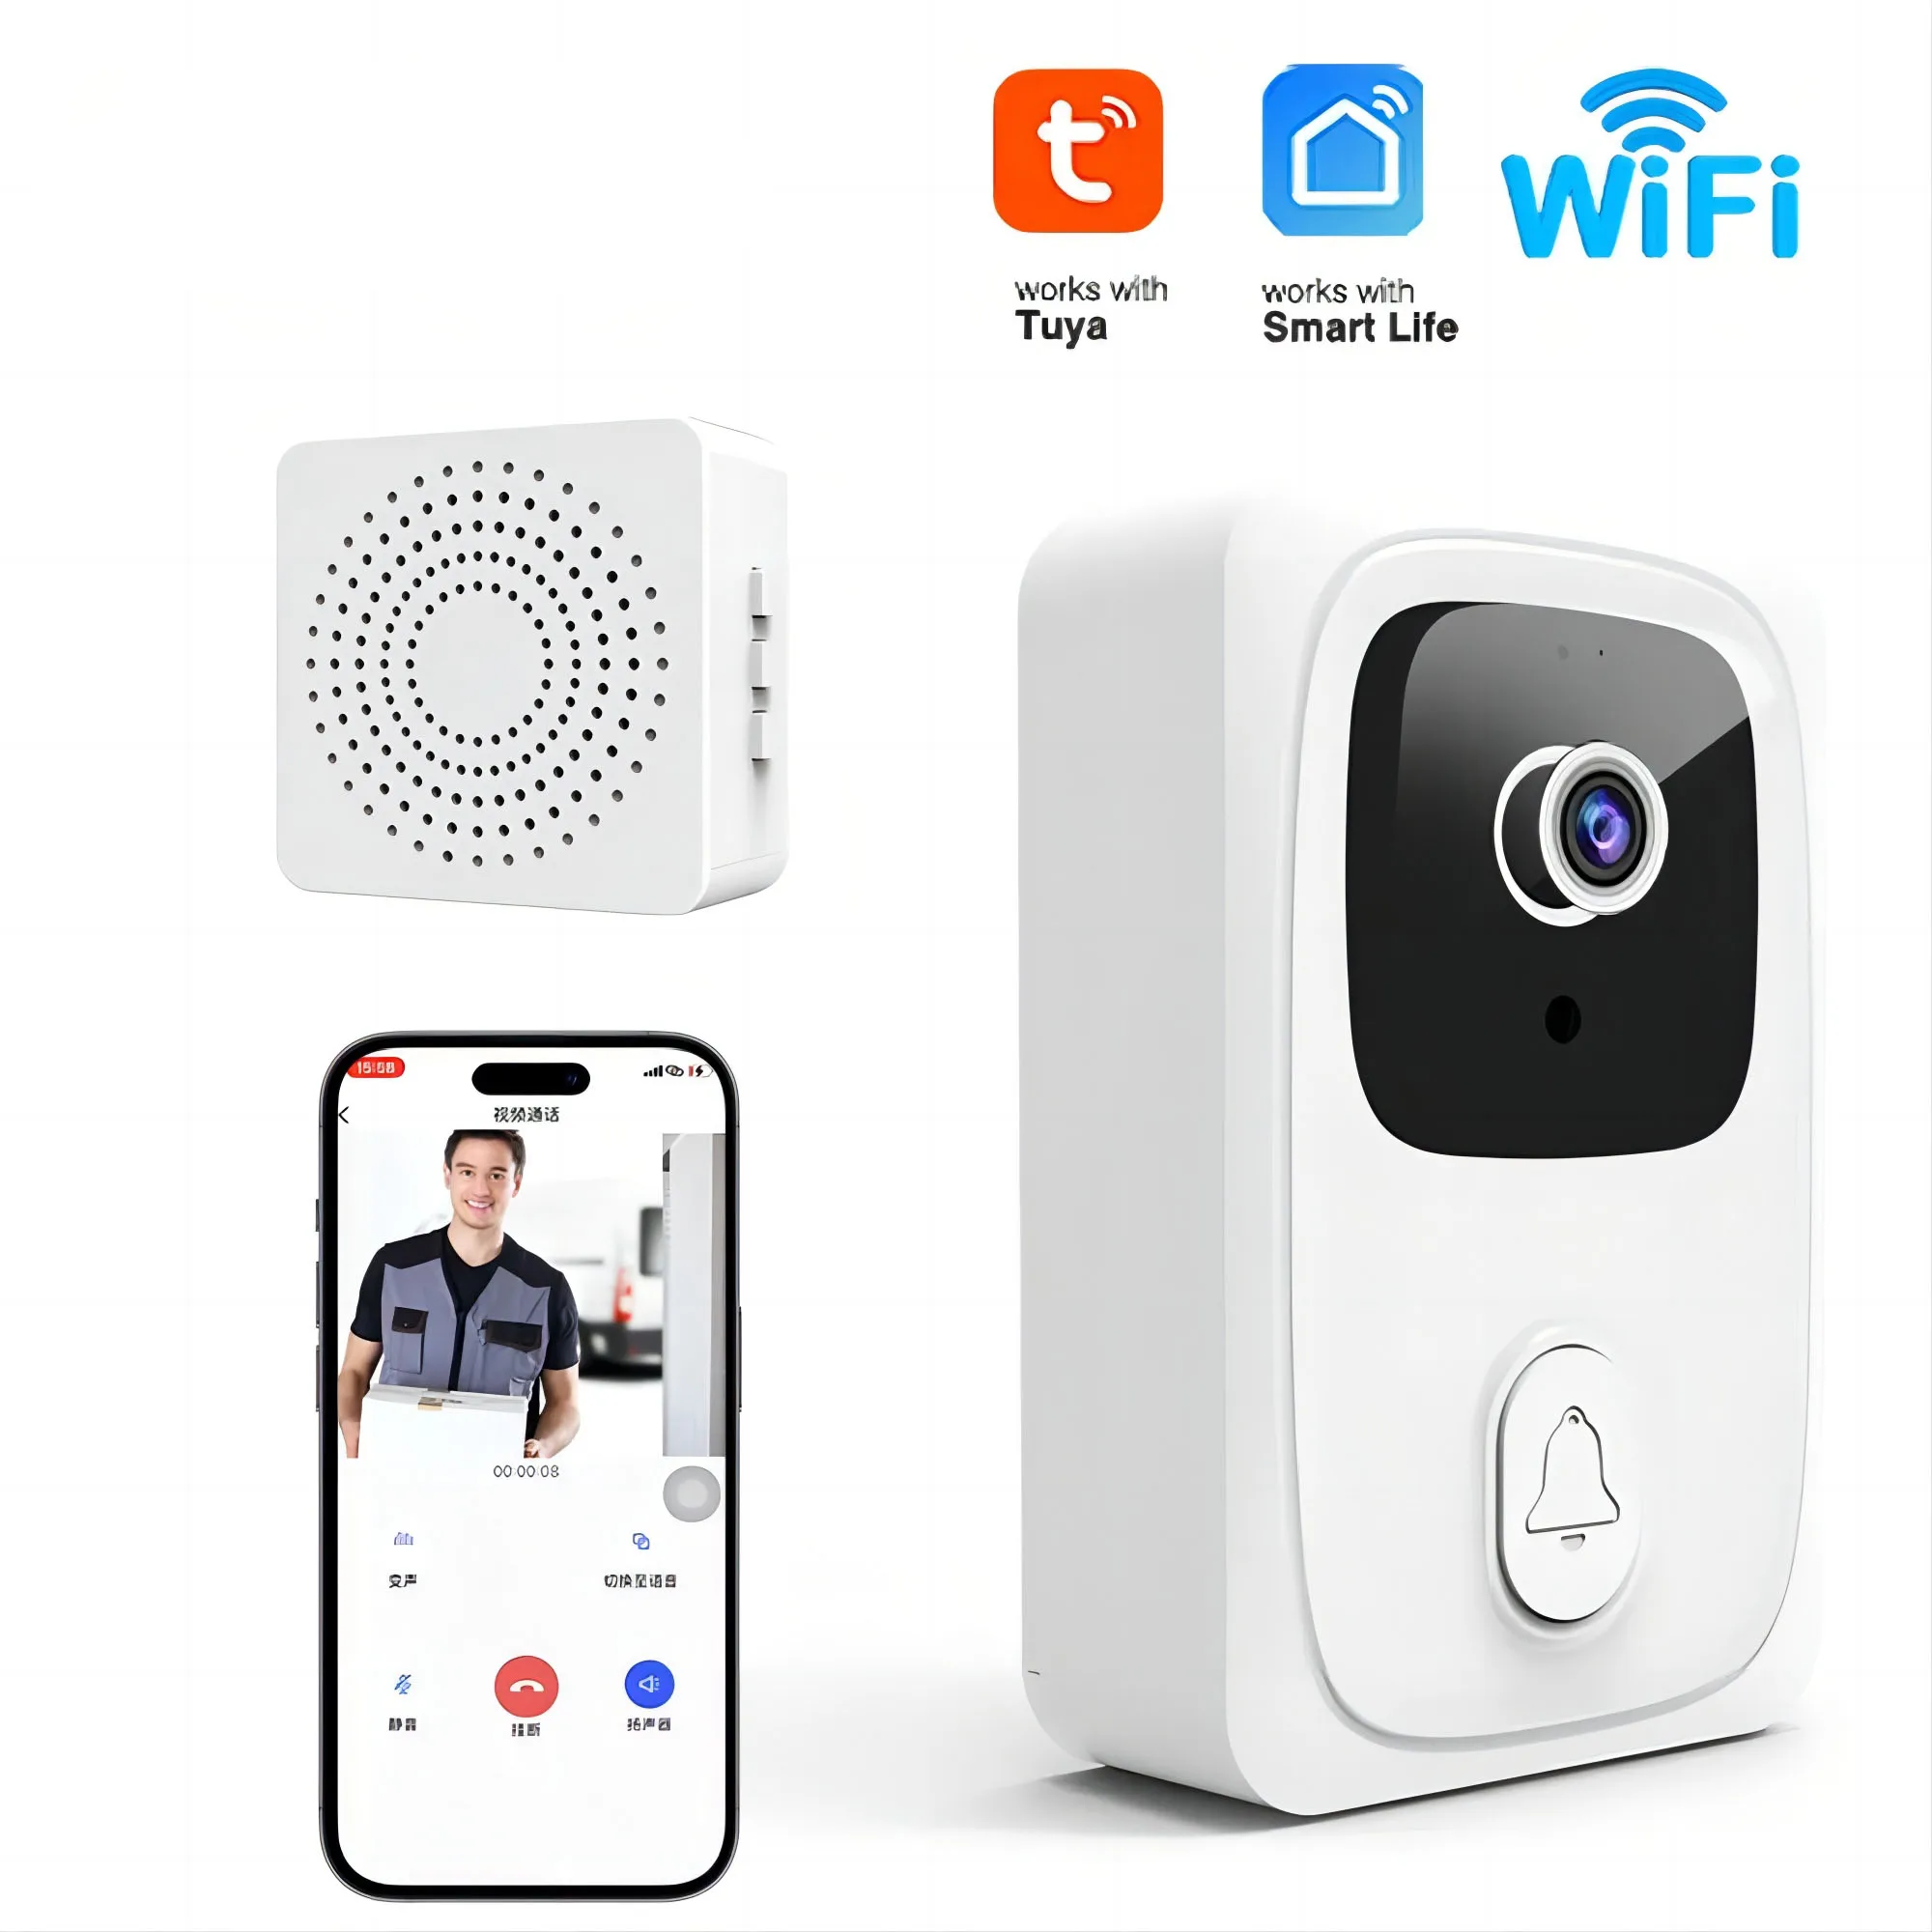 Tuya Video Doorbell Wireless WiFi Door Bell Camera Smart Home Security Night Vision Motion Detection Visual Intercom with Chime wireless wifi doorbell camera waterproof hd video door bell smart outdoor wireless doorbell with camera night vision smart home